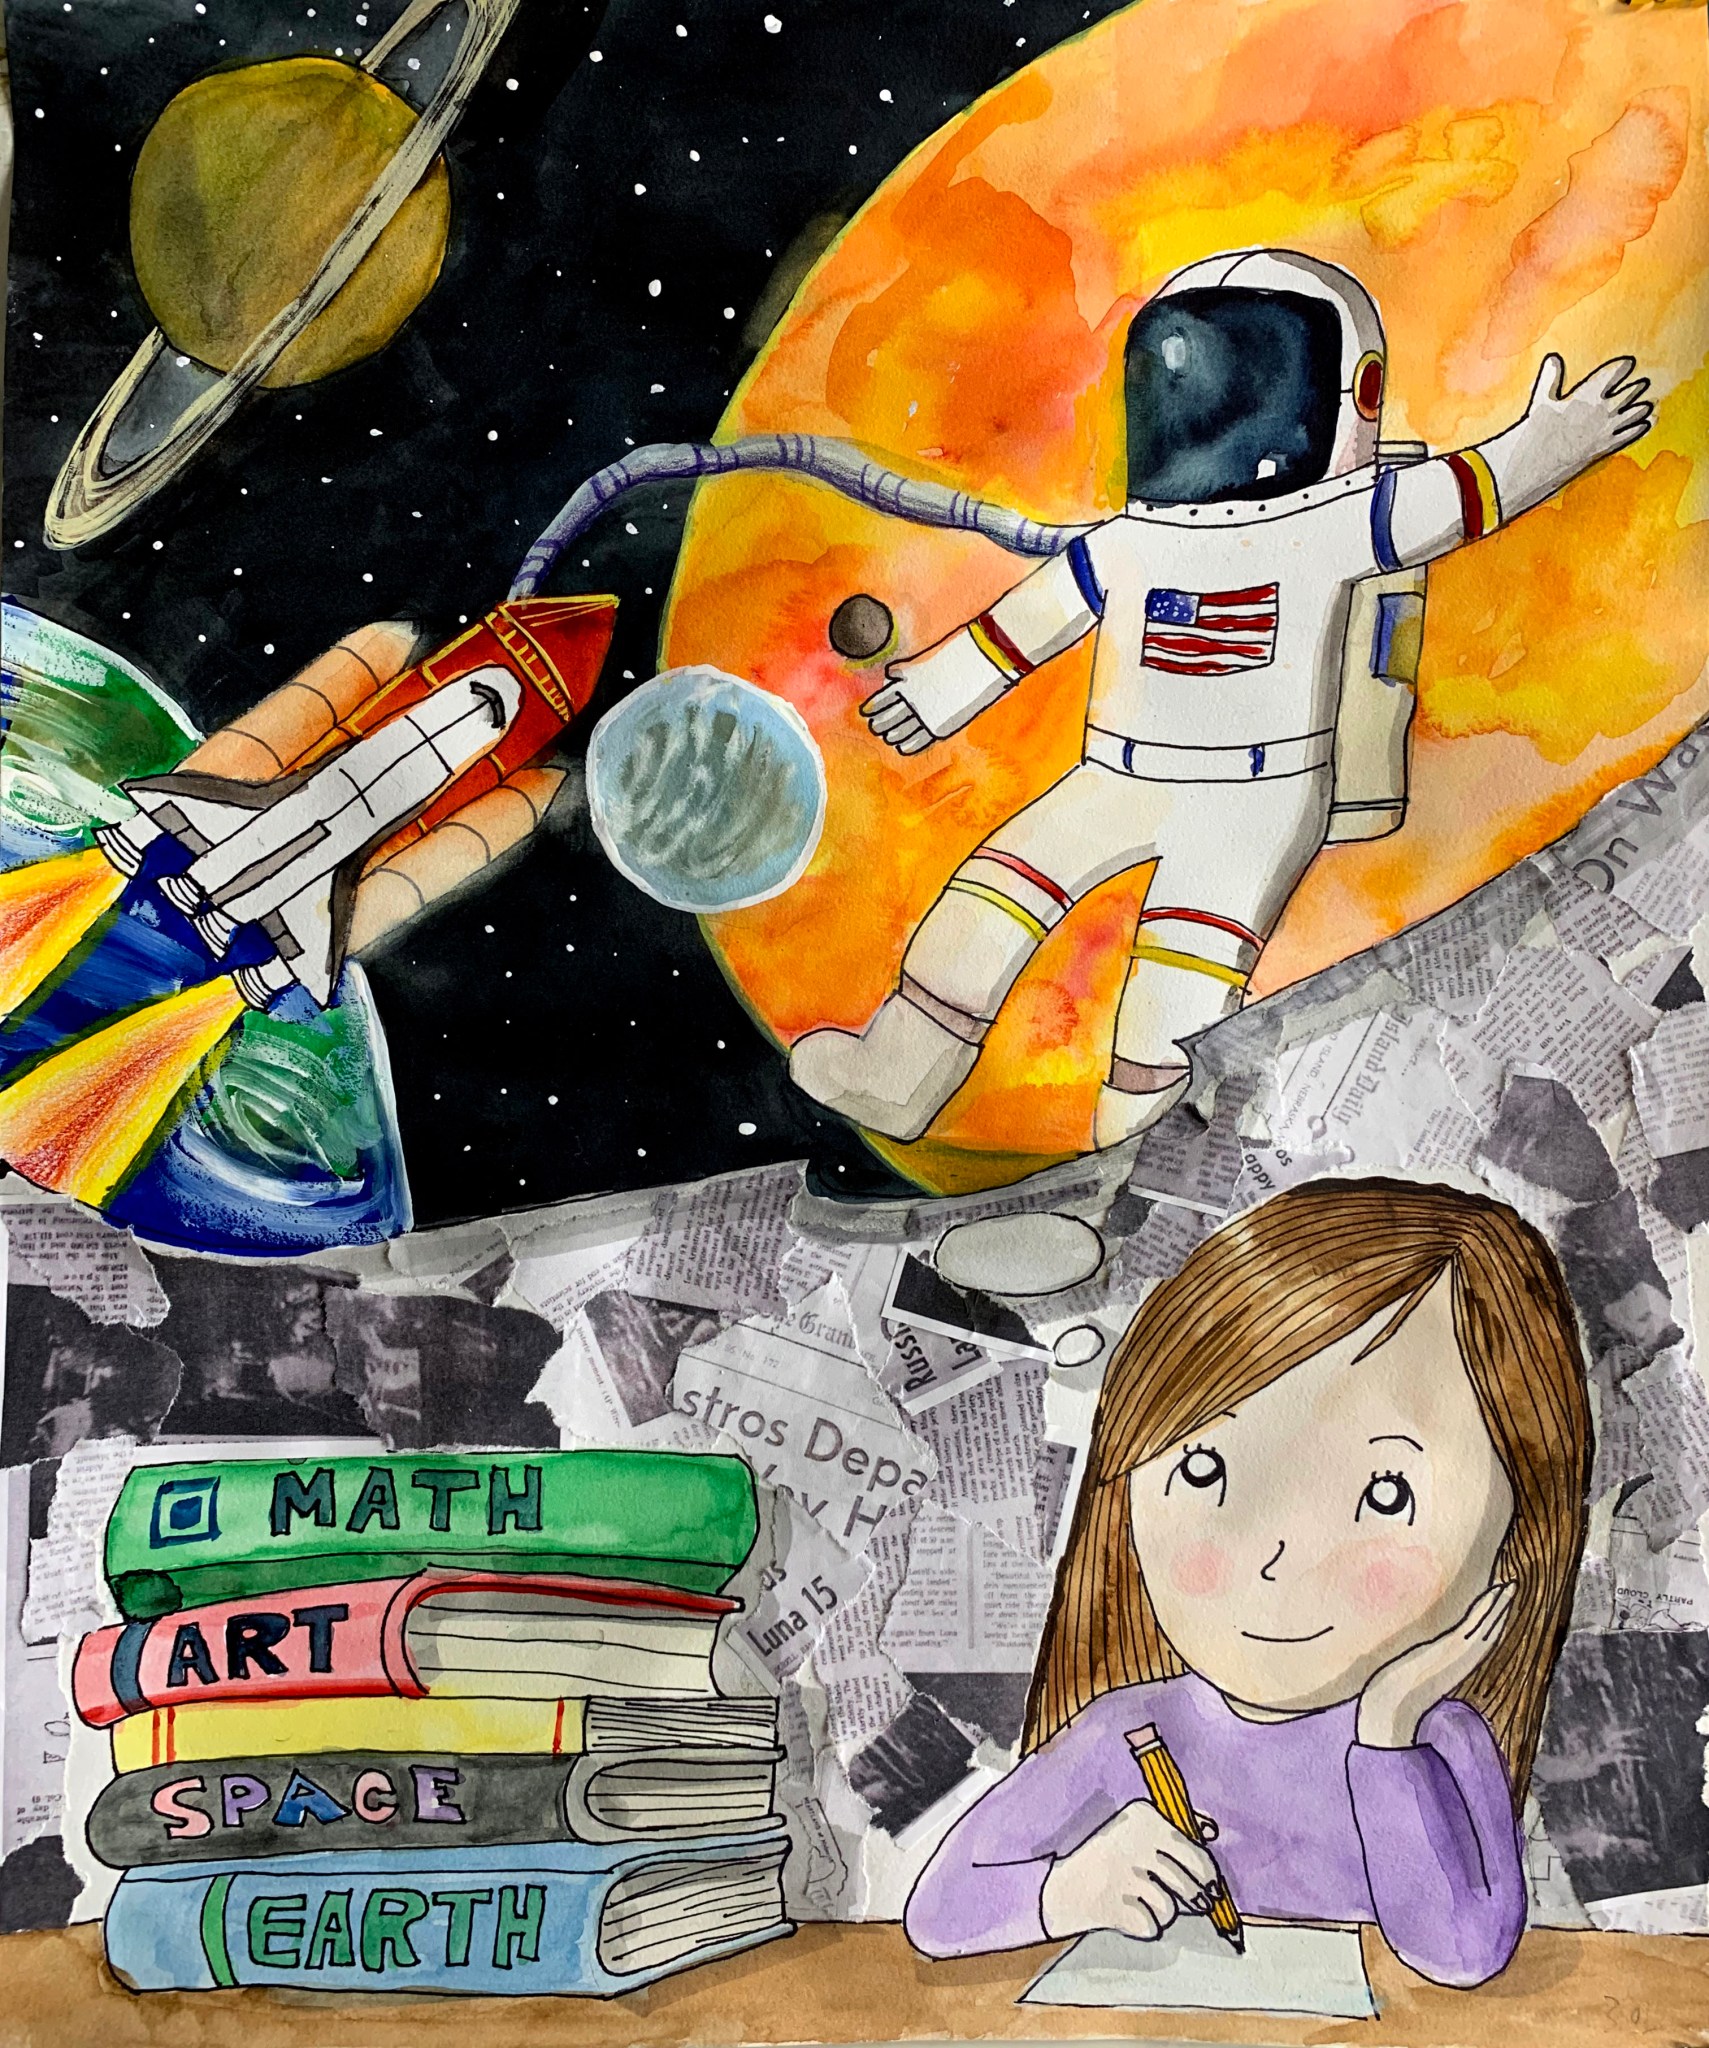 Roa Lee's grand-prize wining entry in the 2019 NASA Langley Student Art Contest.